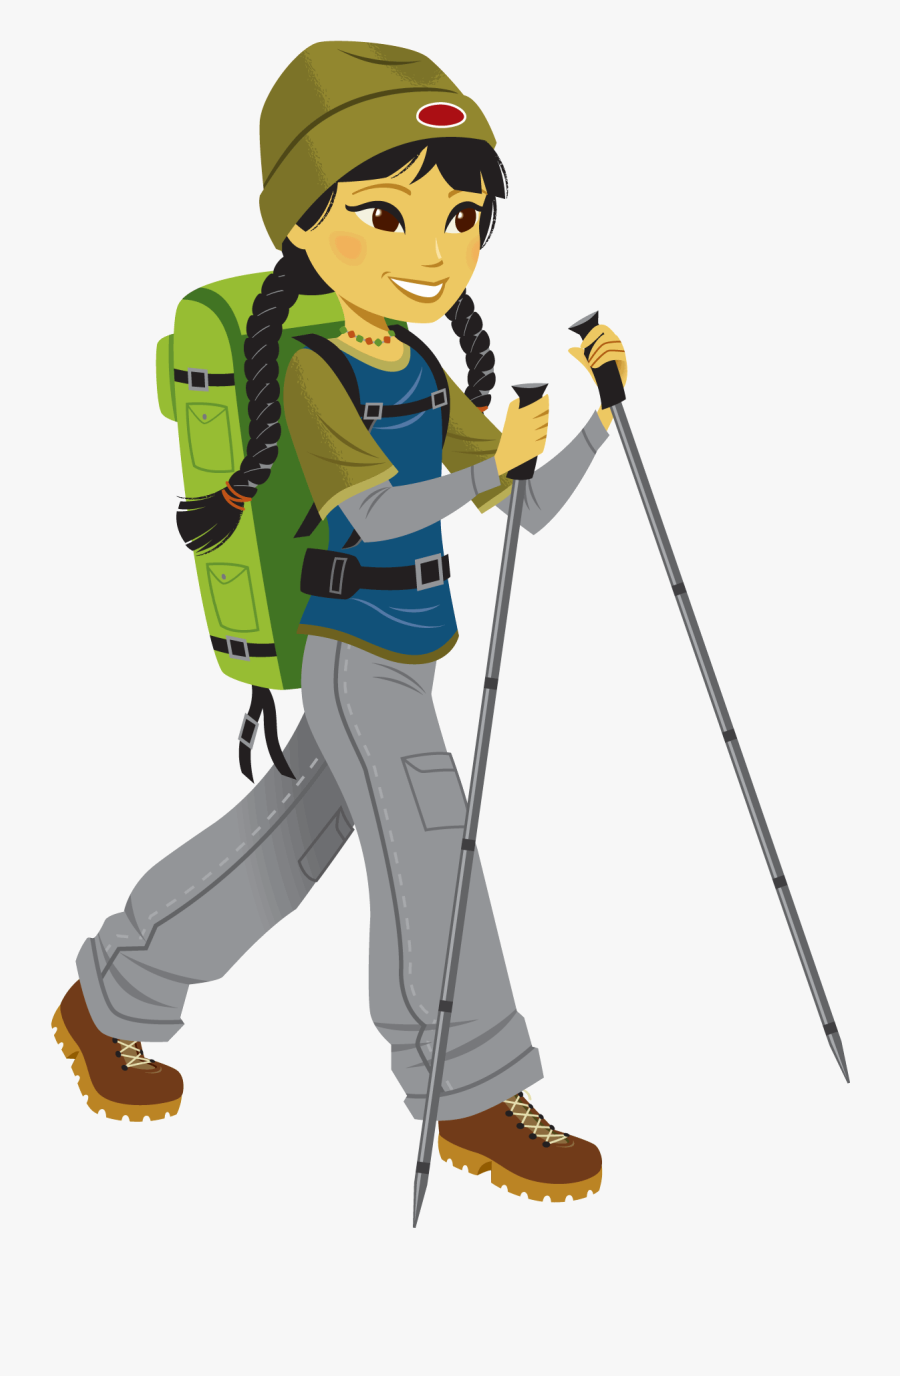 Hiking Clipart Mountaineering Equipment - Clipart Hiking Png, Transparent Clipart